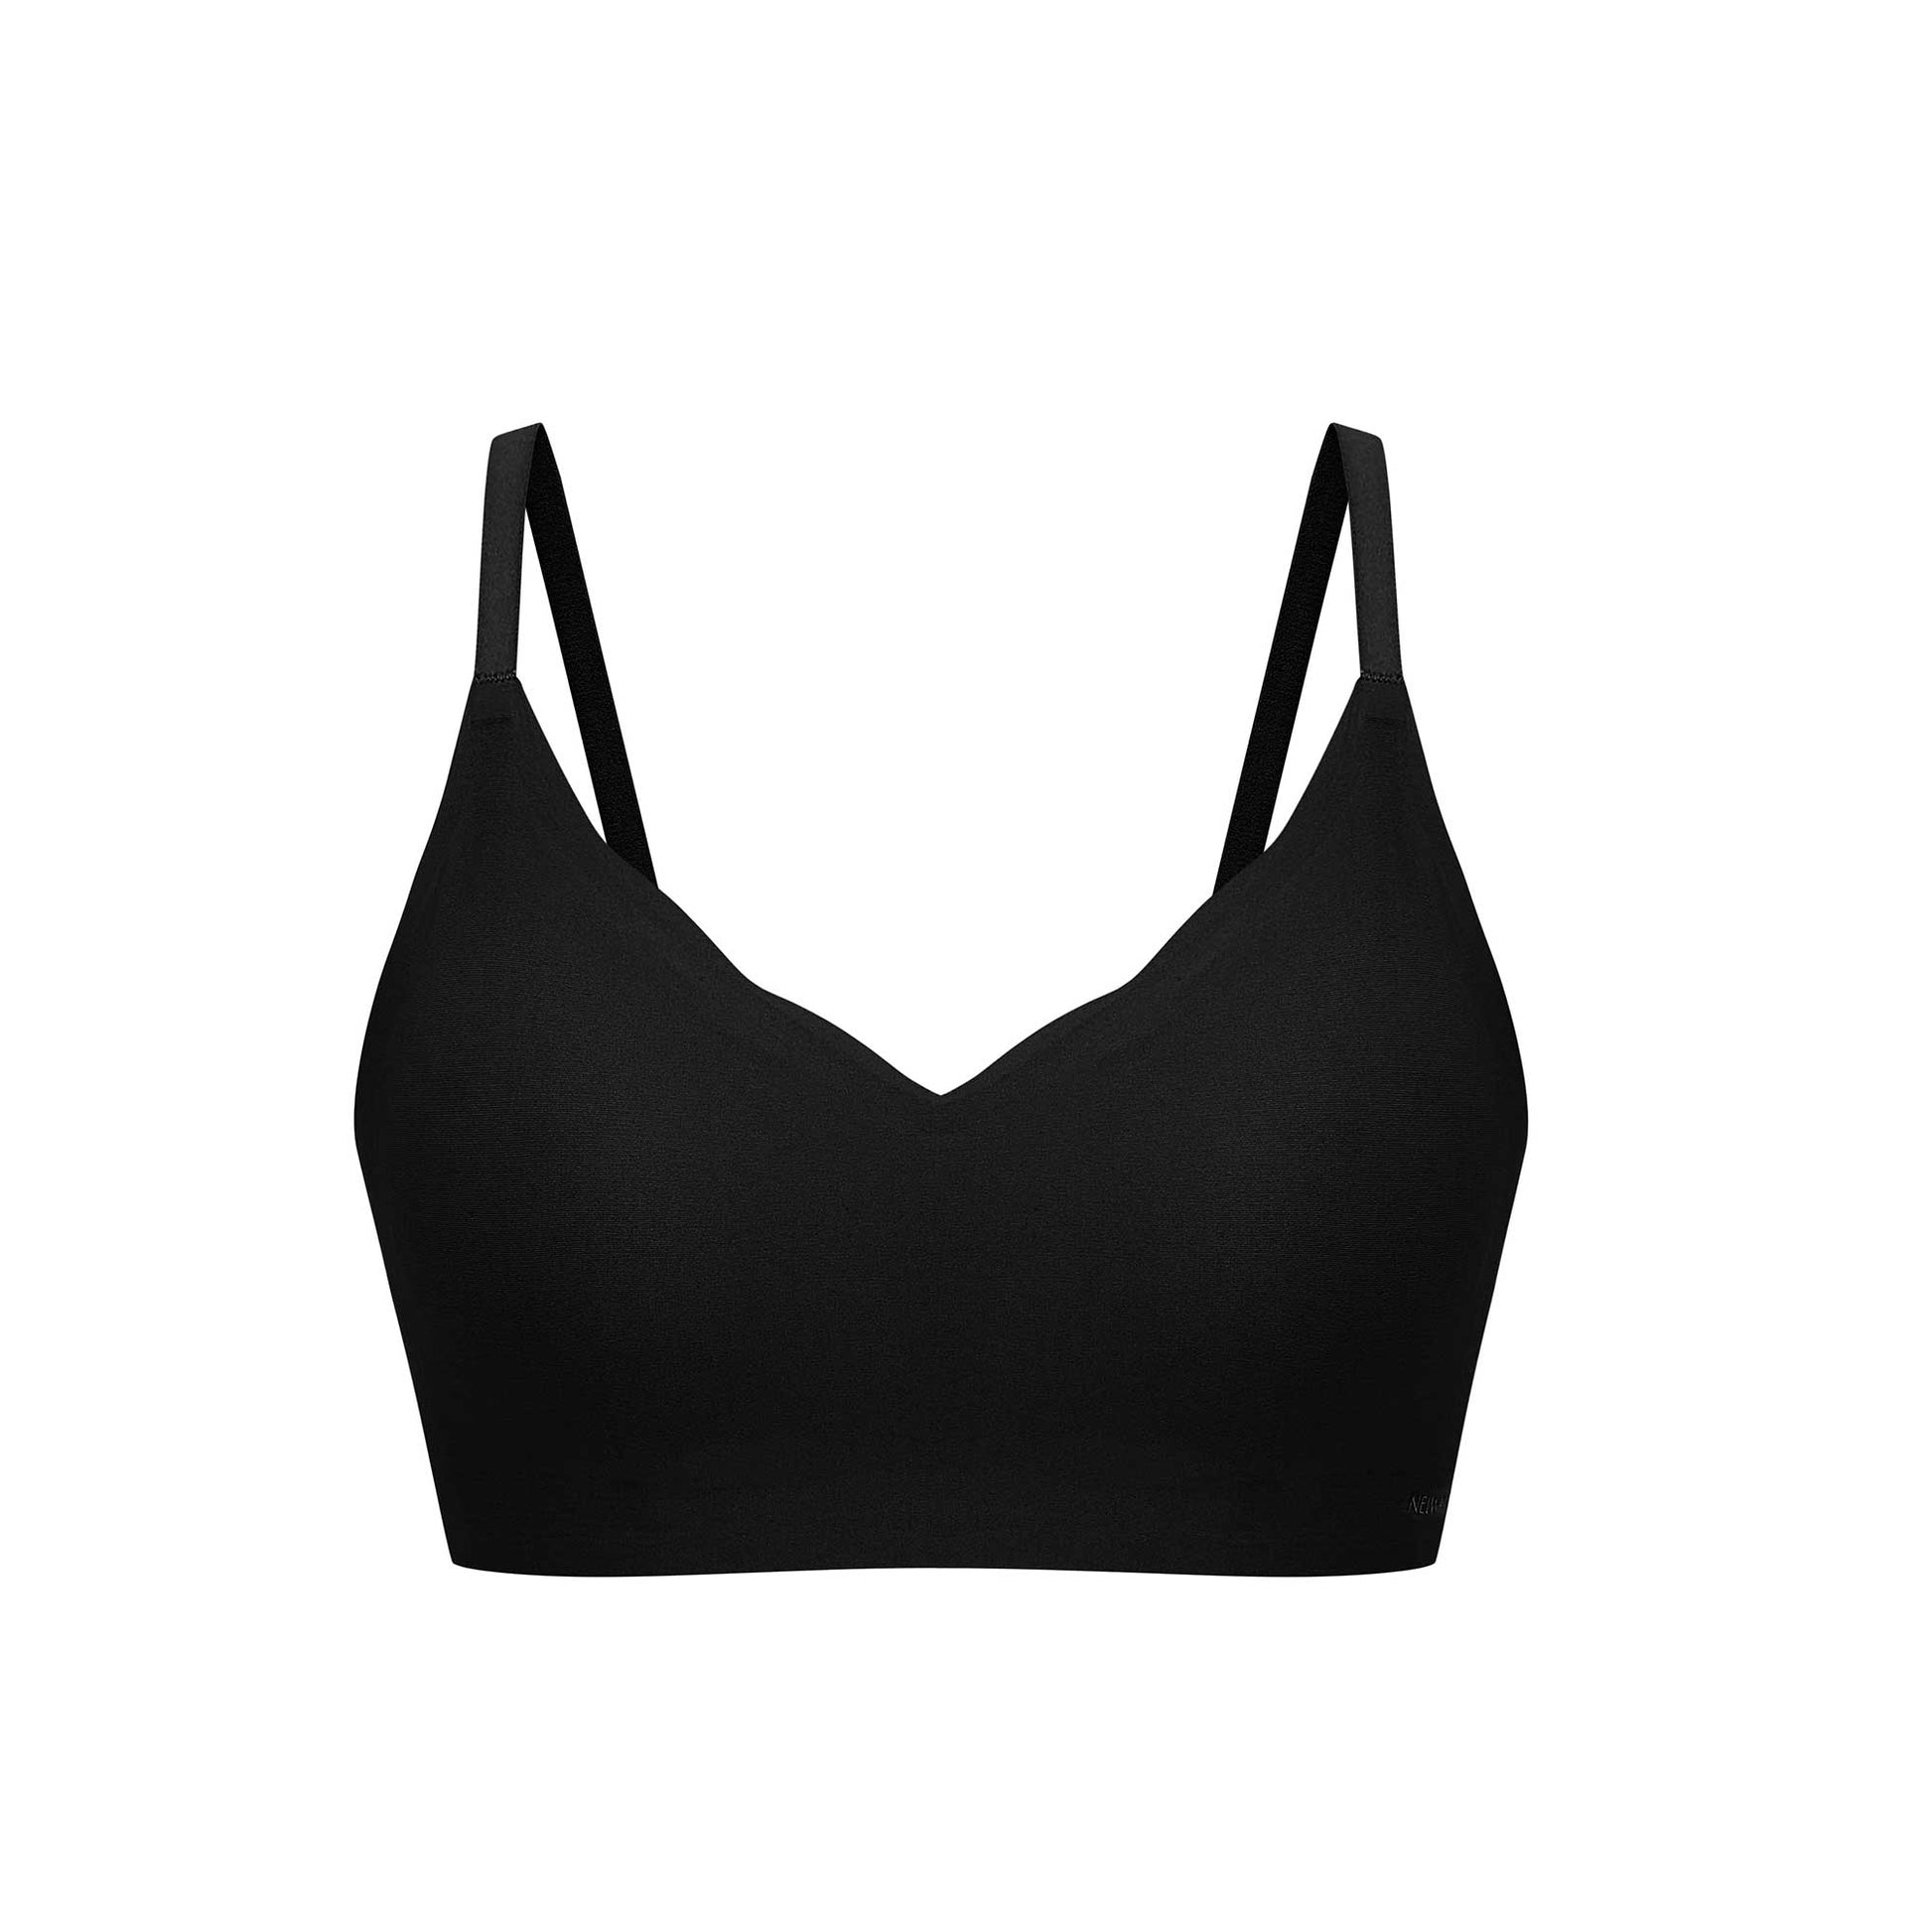 A 67-Year-Old  Shopper Found the “Most Comfortable Bra” They